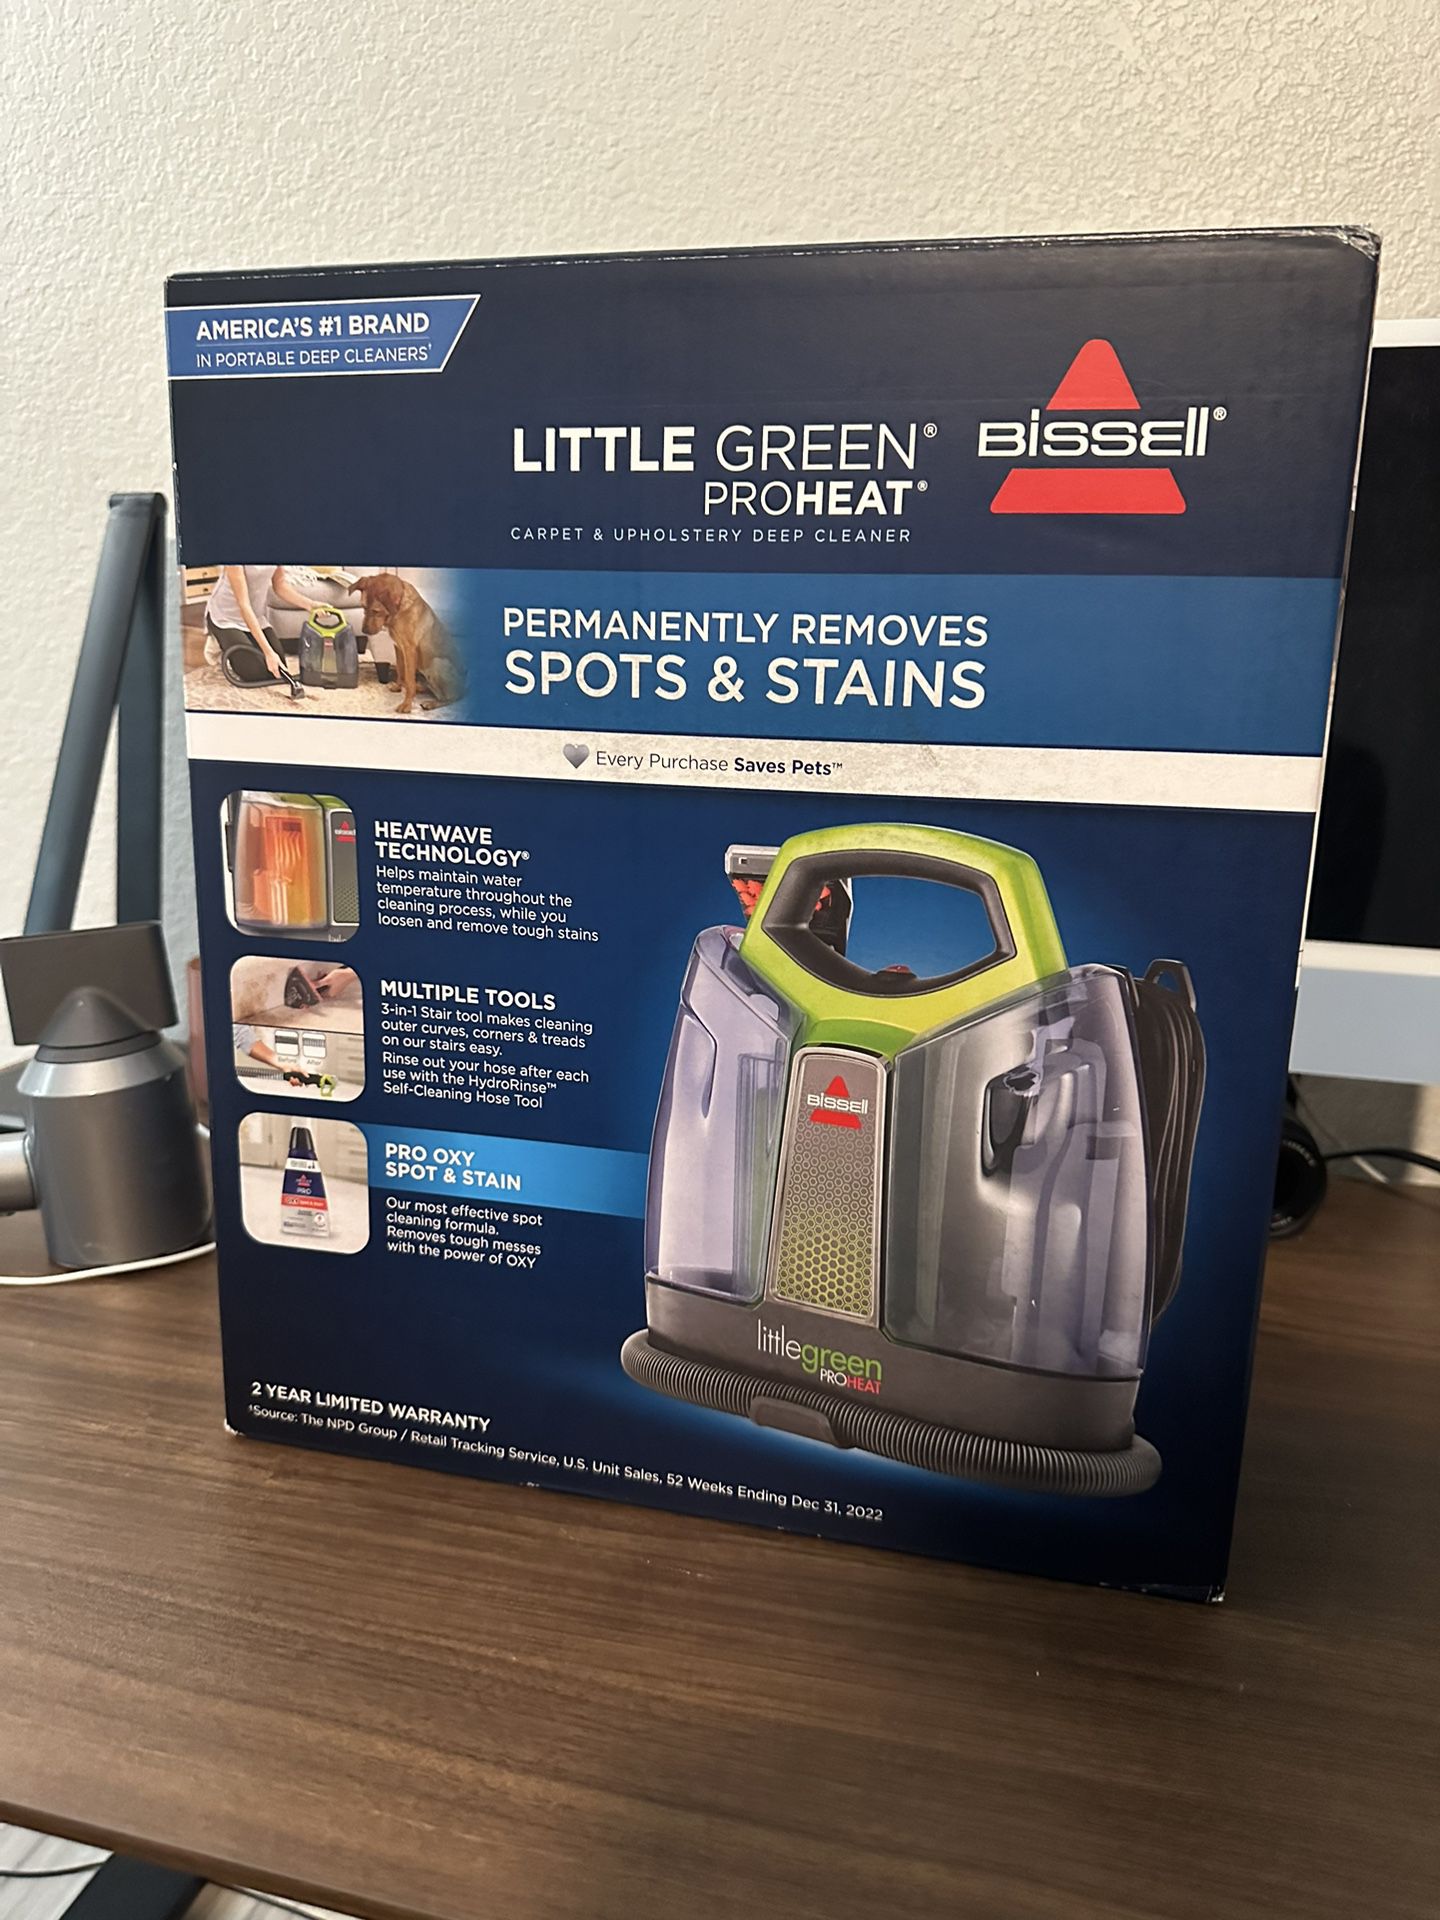 NEW Bissell ProHeat Little green Spot cleaner   